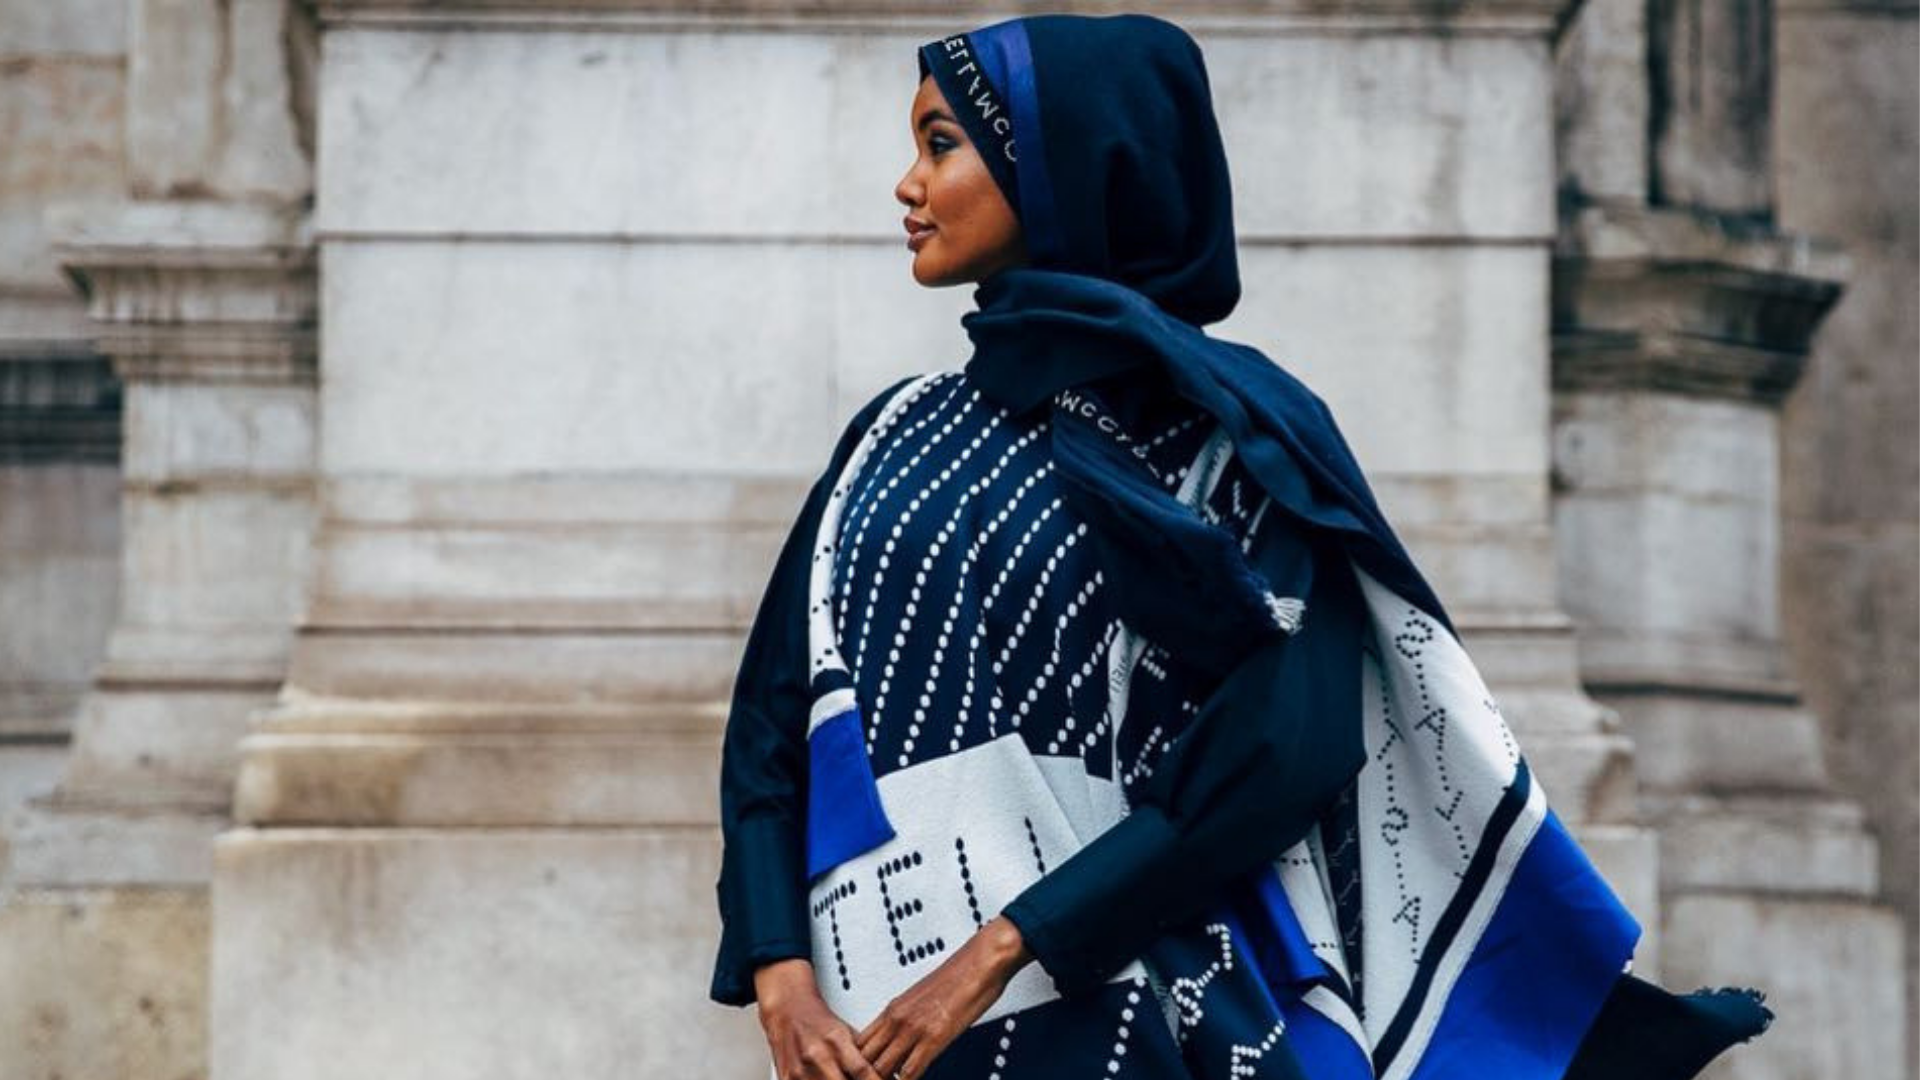 Halima Has a New Hijab Collection with Modanisa